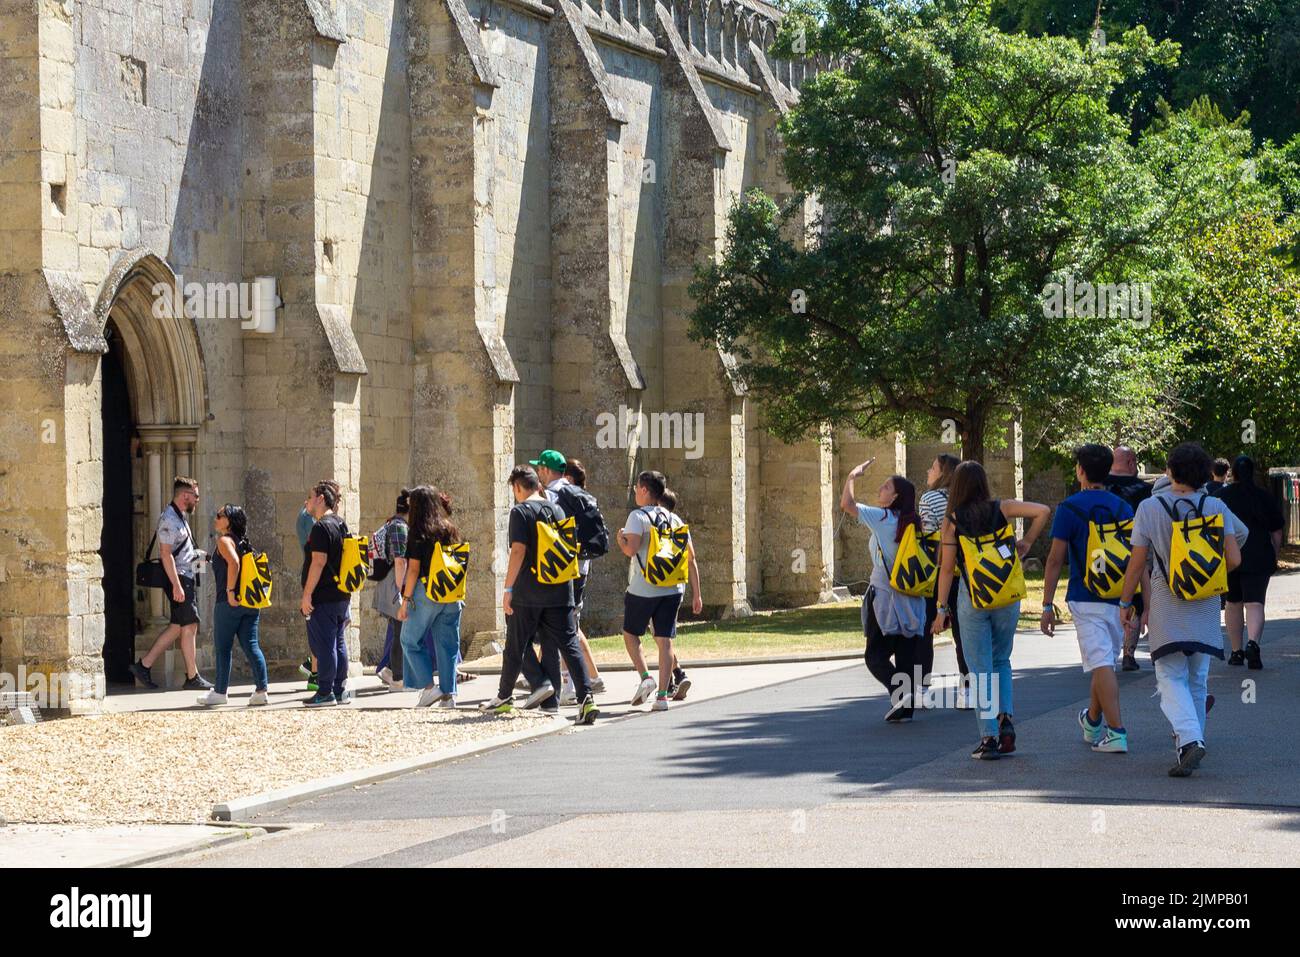 Salisbury, Wiltshire, UK, 7th August 2022, Weather: Hot sunshine in the cathedral city as another heatwave builds. A tour group with matching yellow rucksacks file into the cathedral visitor’s entrance. Credit: Paul Biggins/Alamy Live News Stock Photo